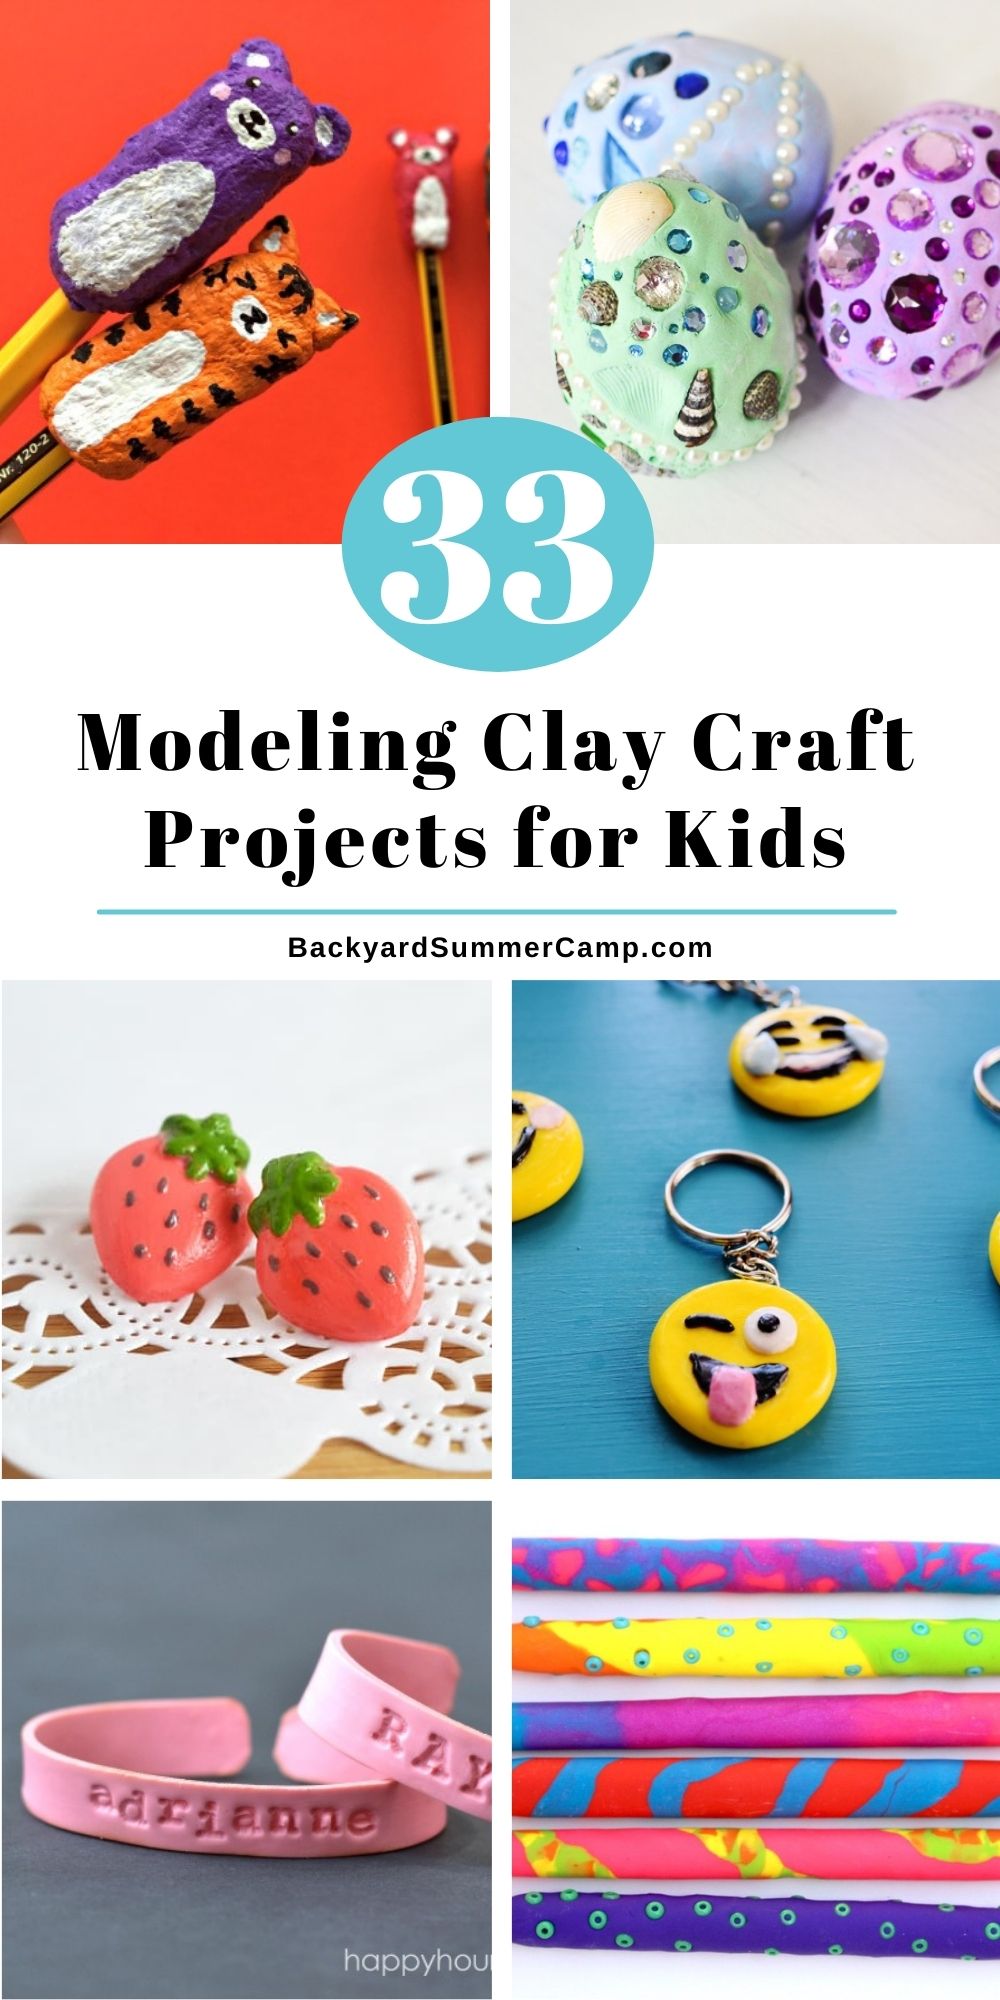 11 Fun Things Your Kids Can Make with Polymer Clay